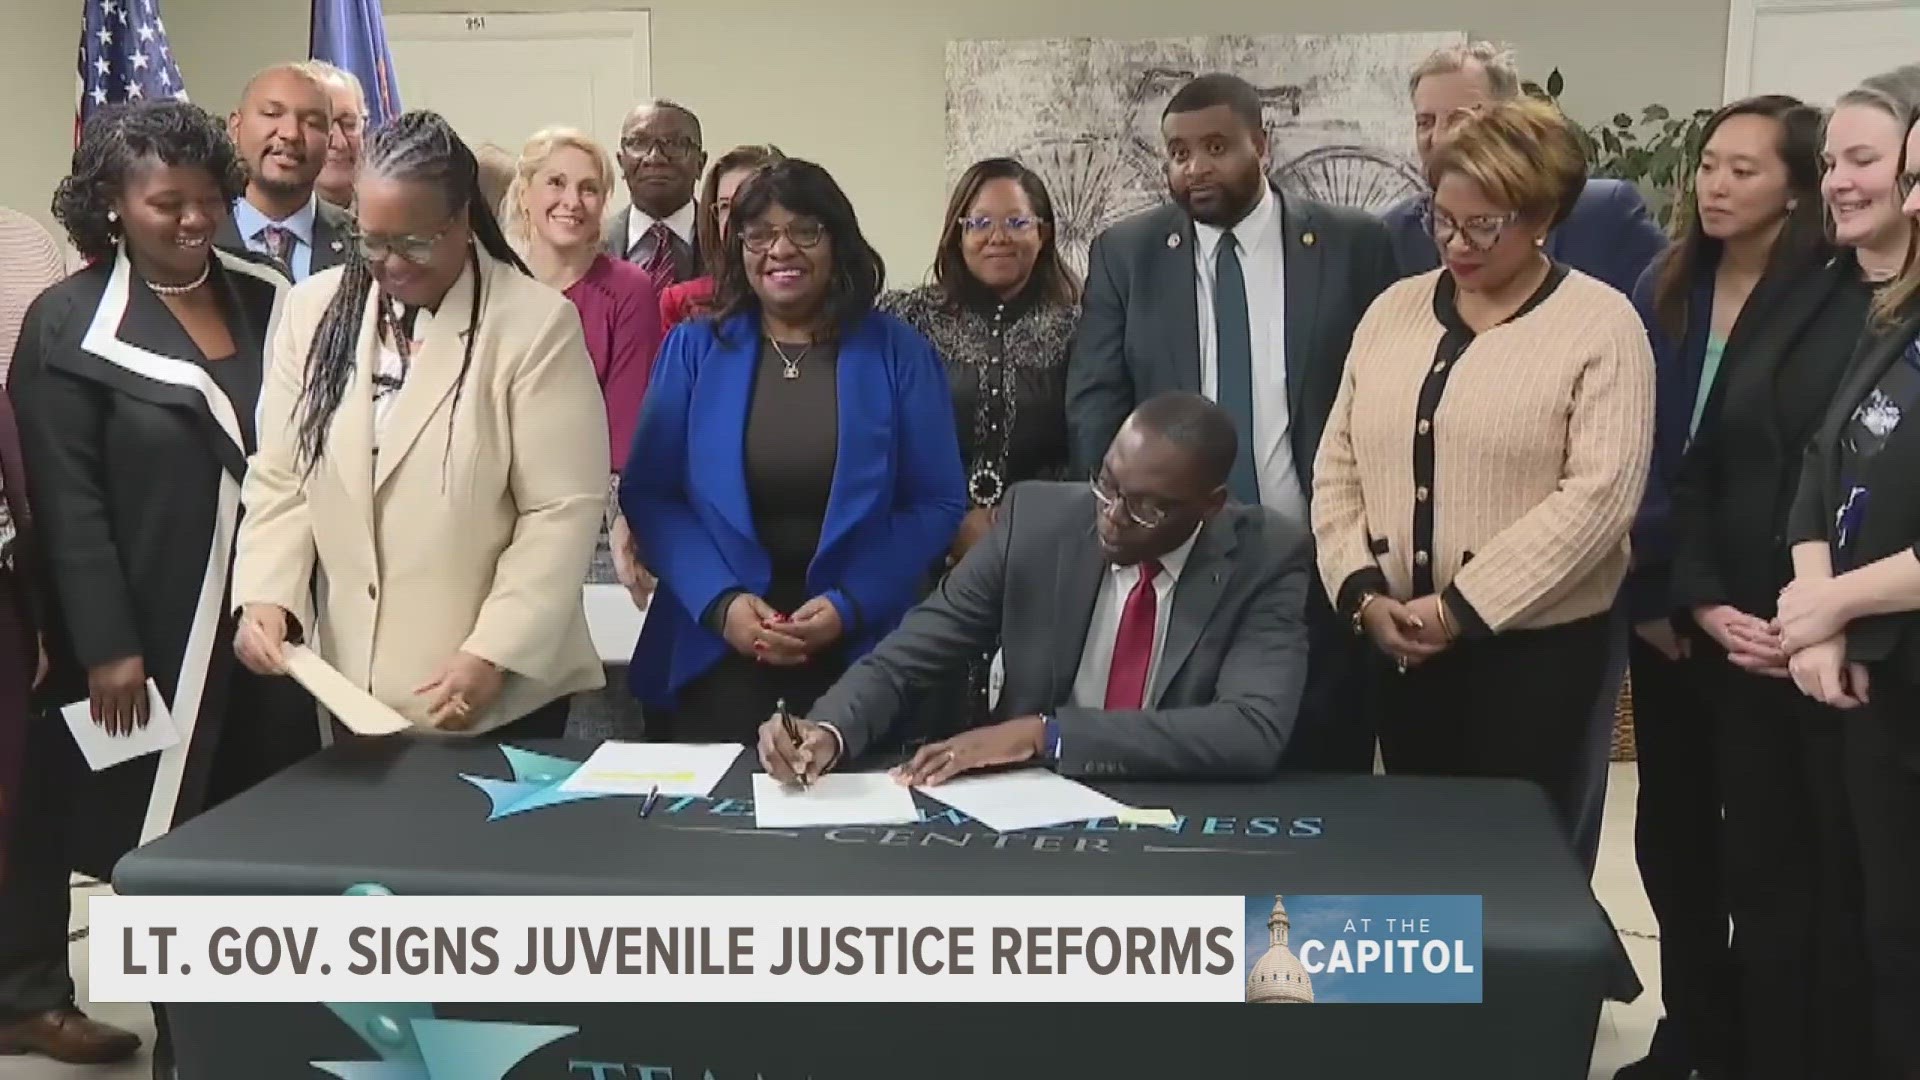 Lieutenant governor Garlin Gilchrist signed a number of bills to change the state's juvenile justice laws.